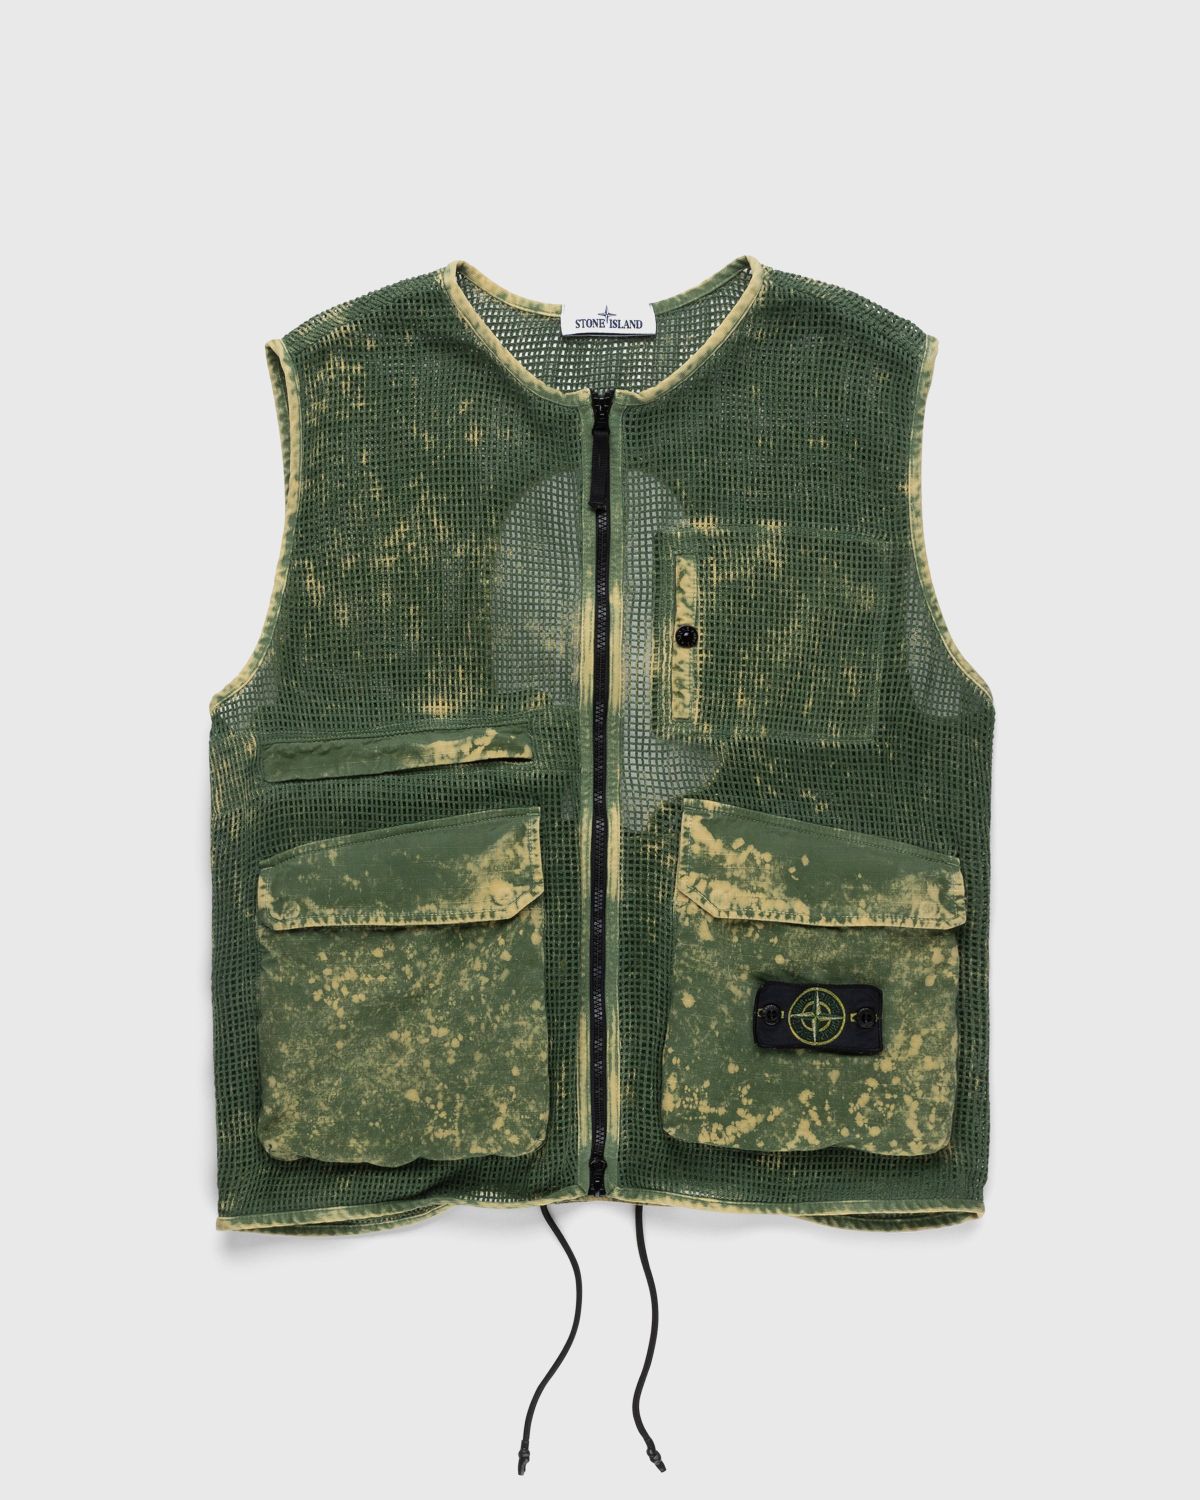 Stone Island – G0622 Garment-Dyed Cotton Mesh Vest Olive - Outerwear - Green - Image 1